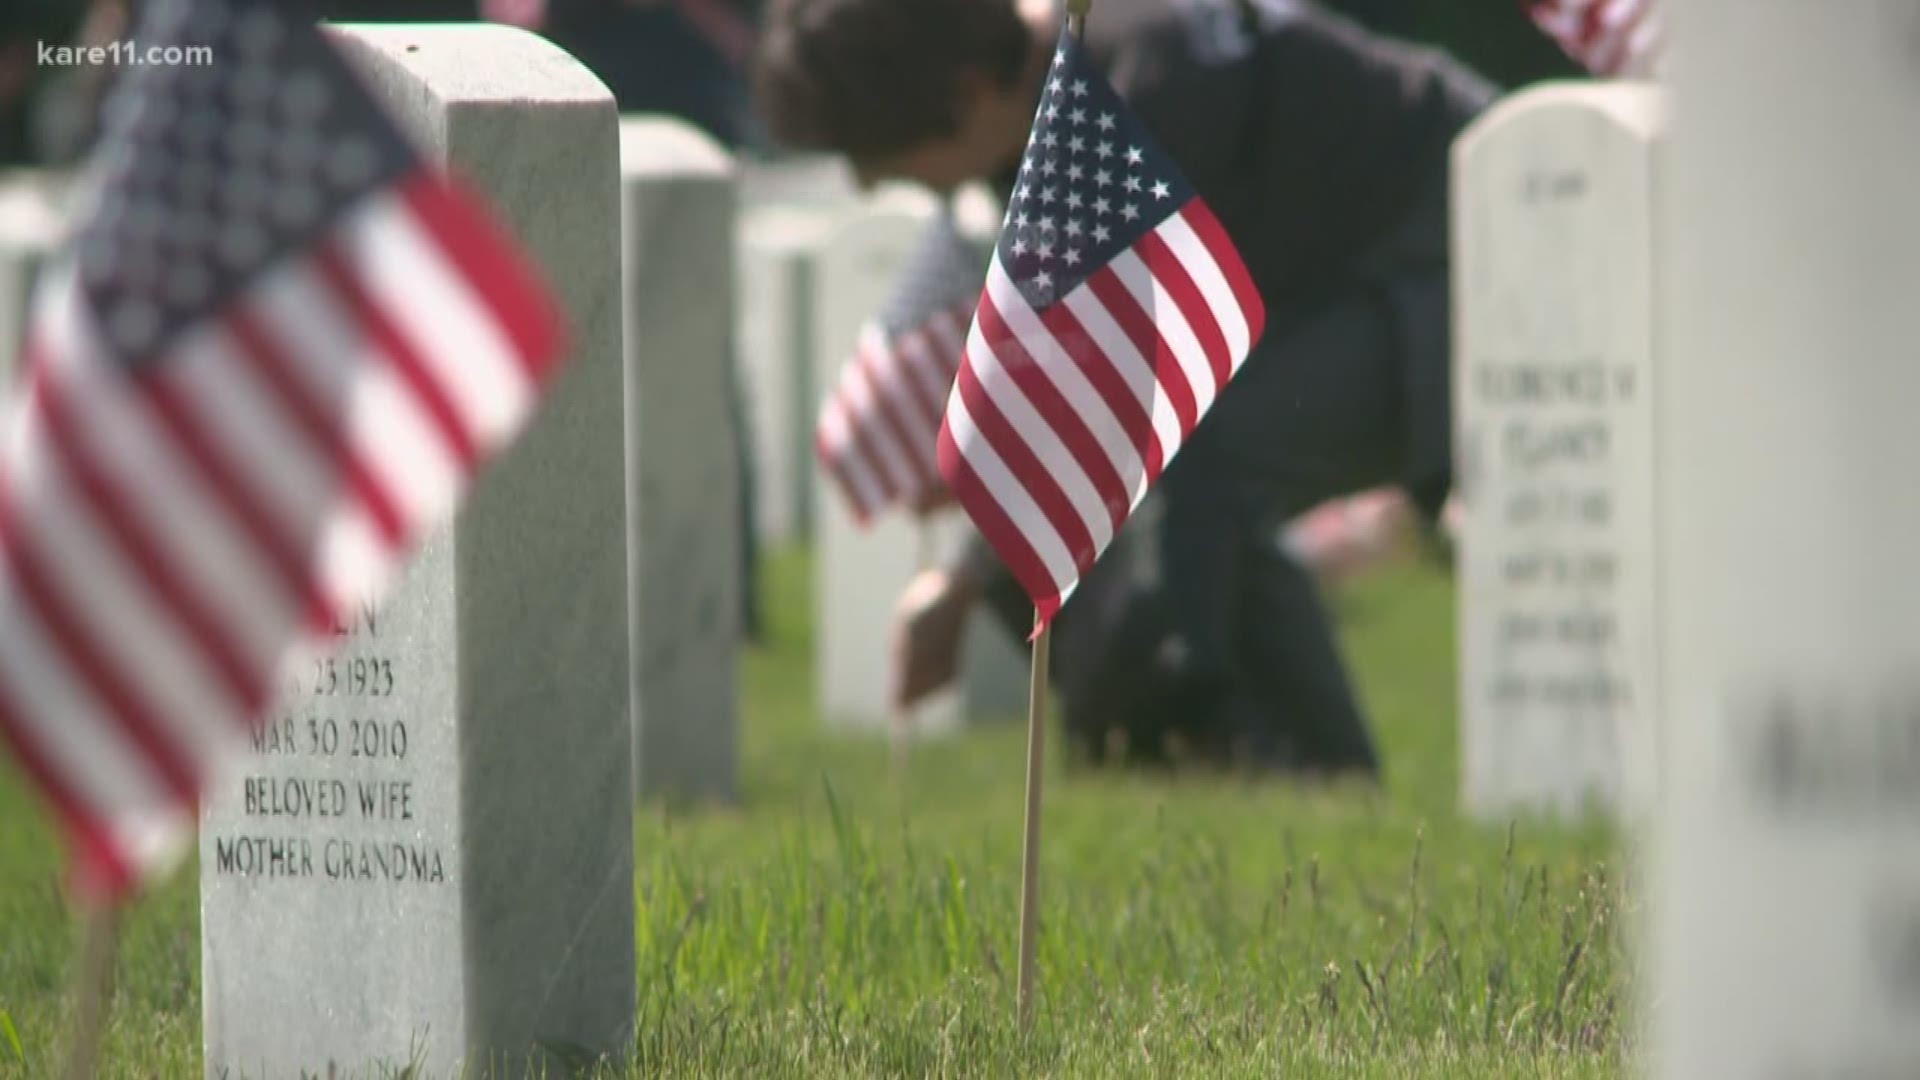 Despite the rainy weather, people will gather at Fort Snelling National Cemetery to honor the fallen this Memorial Day - and there not be a single headstone without a flag. https://kare11.tv/2JE1FdK